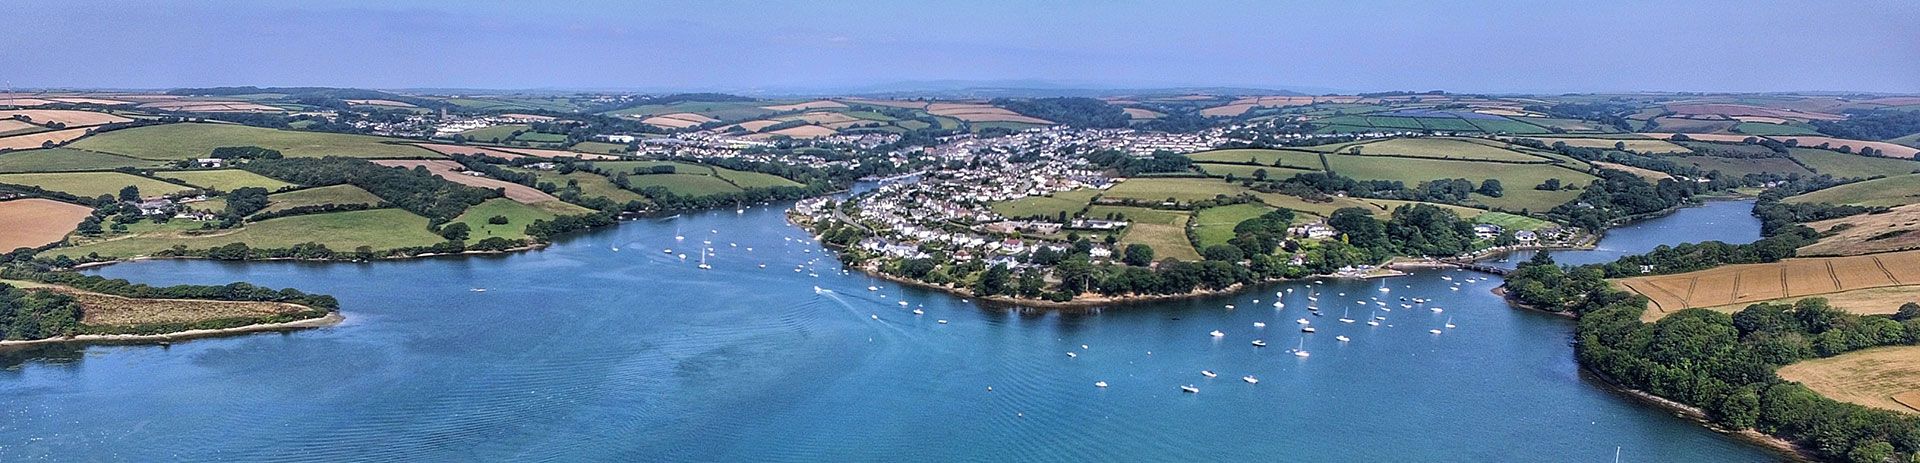 an aerial view of a large body of water surrounded by trees and fields at salcombe.